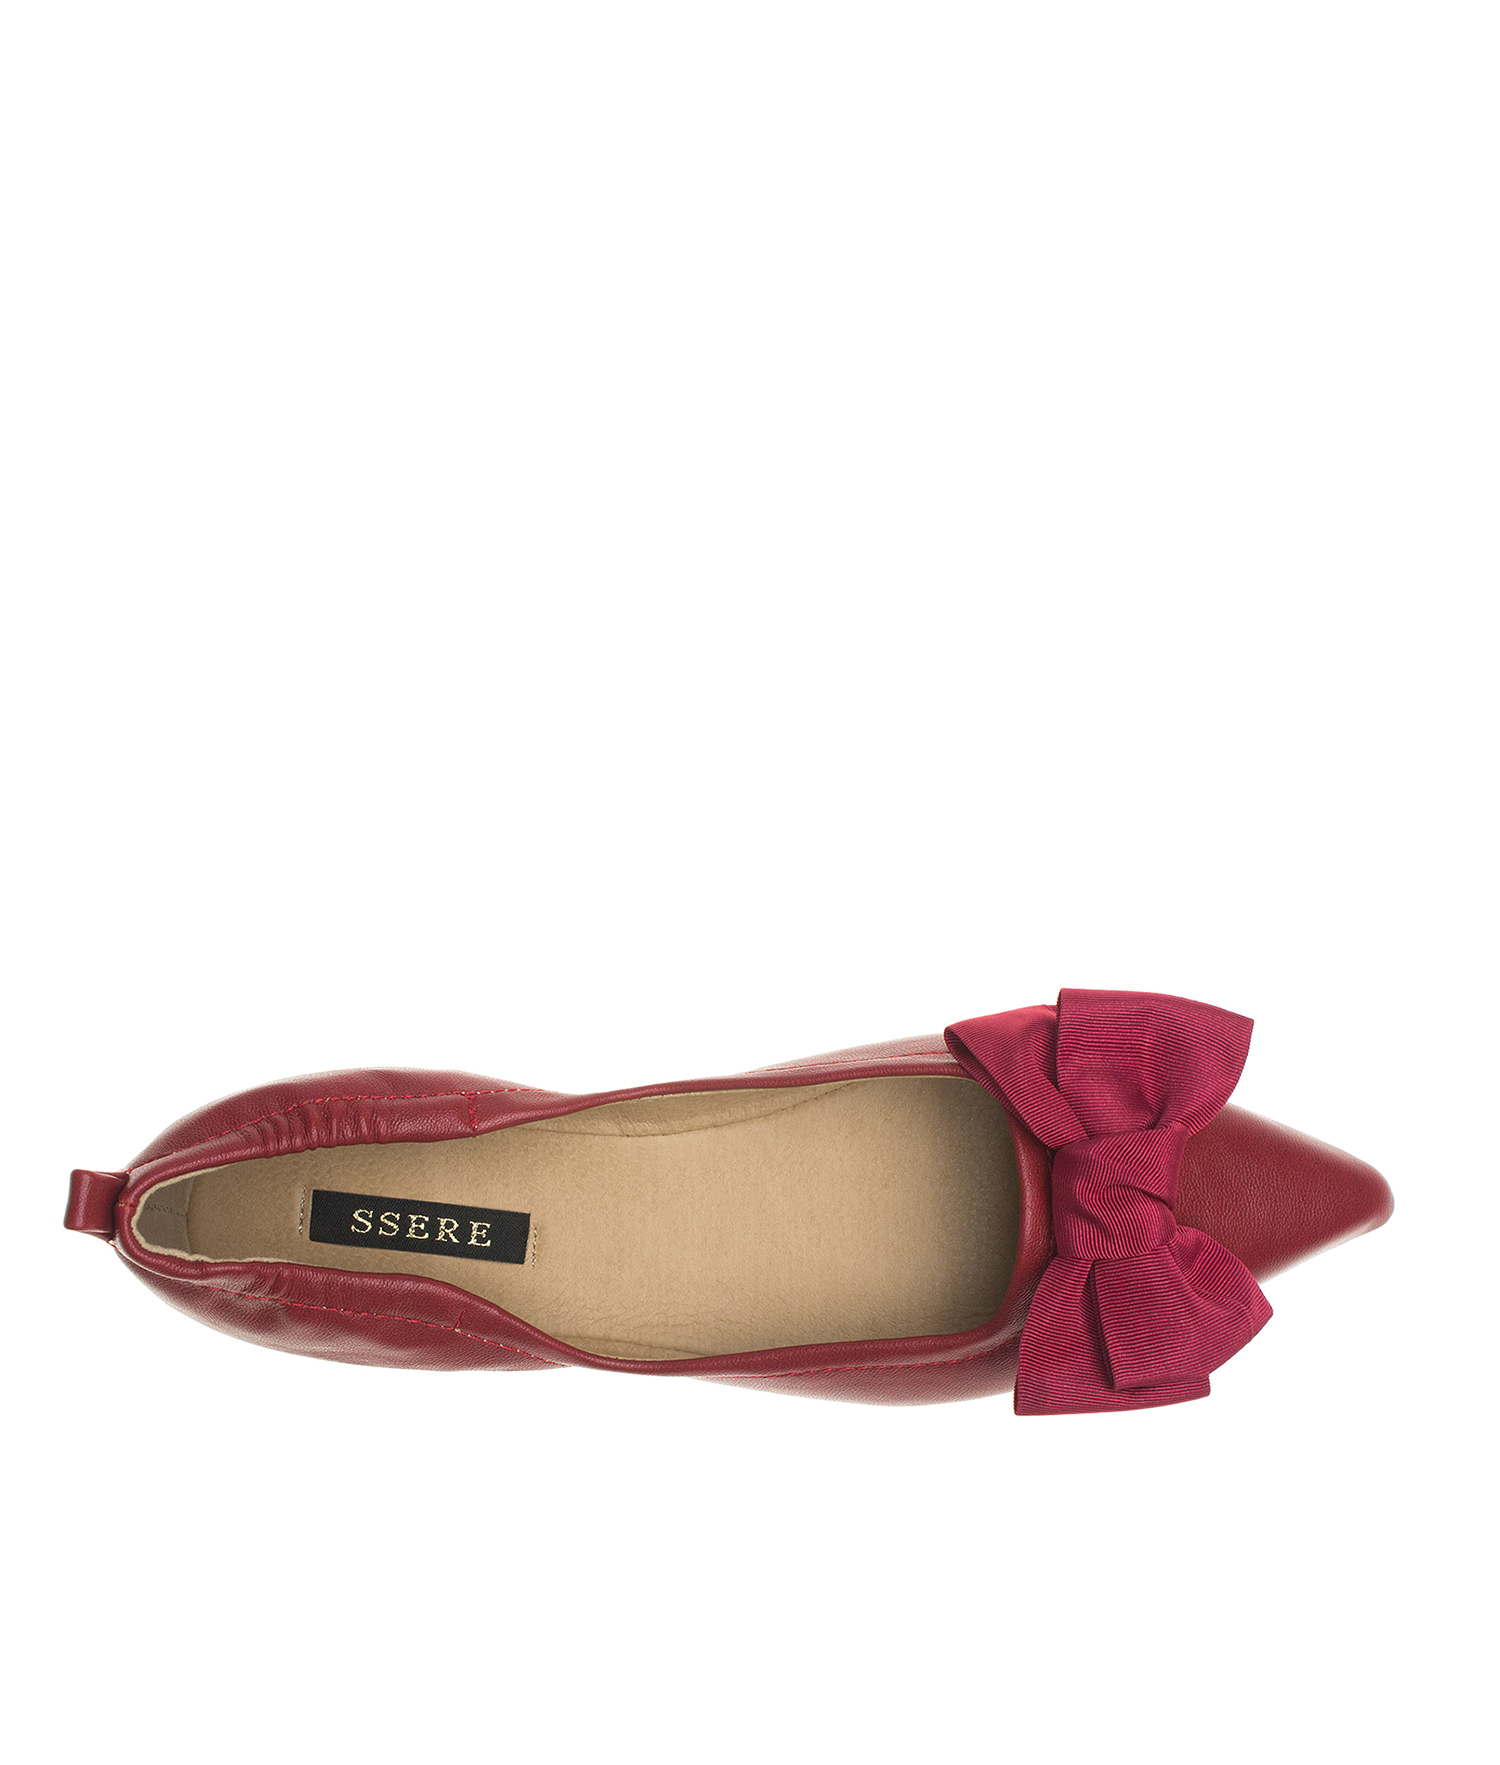 women's flats with bows